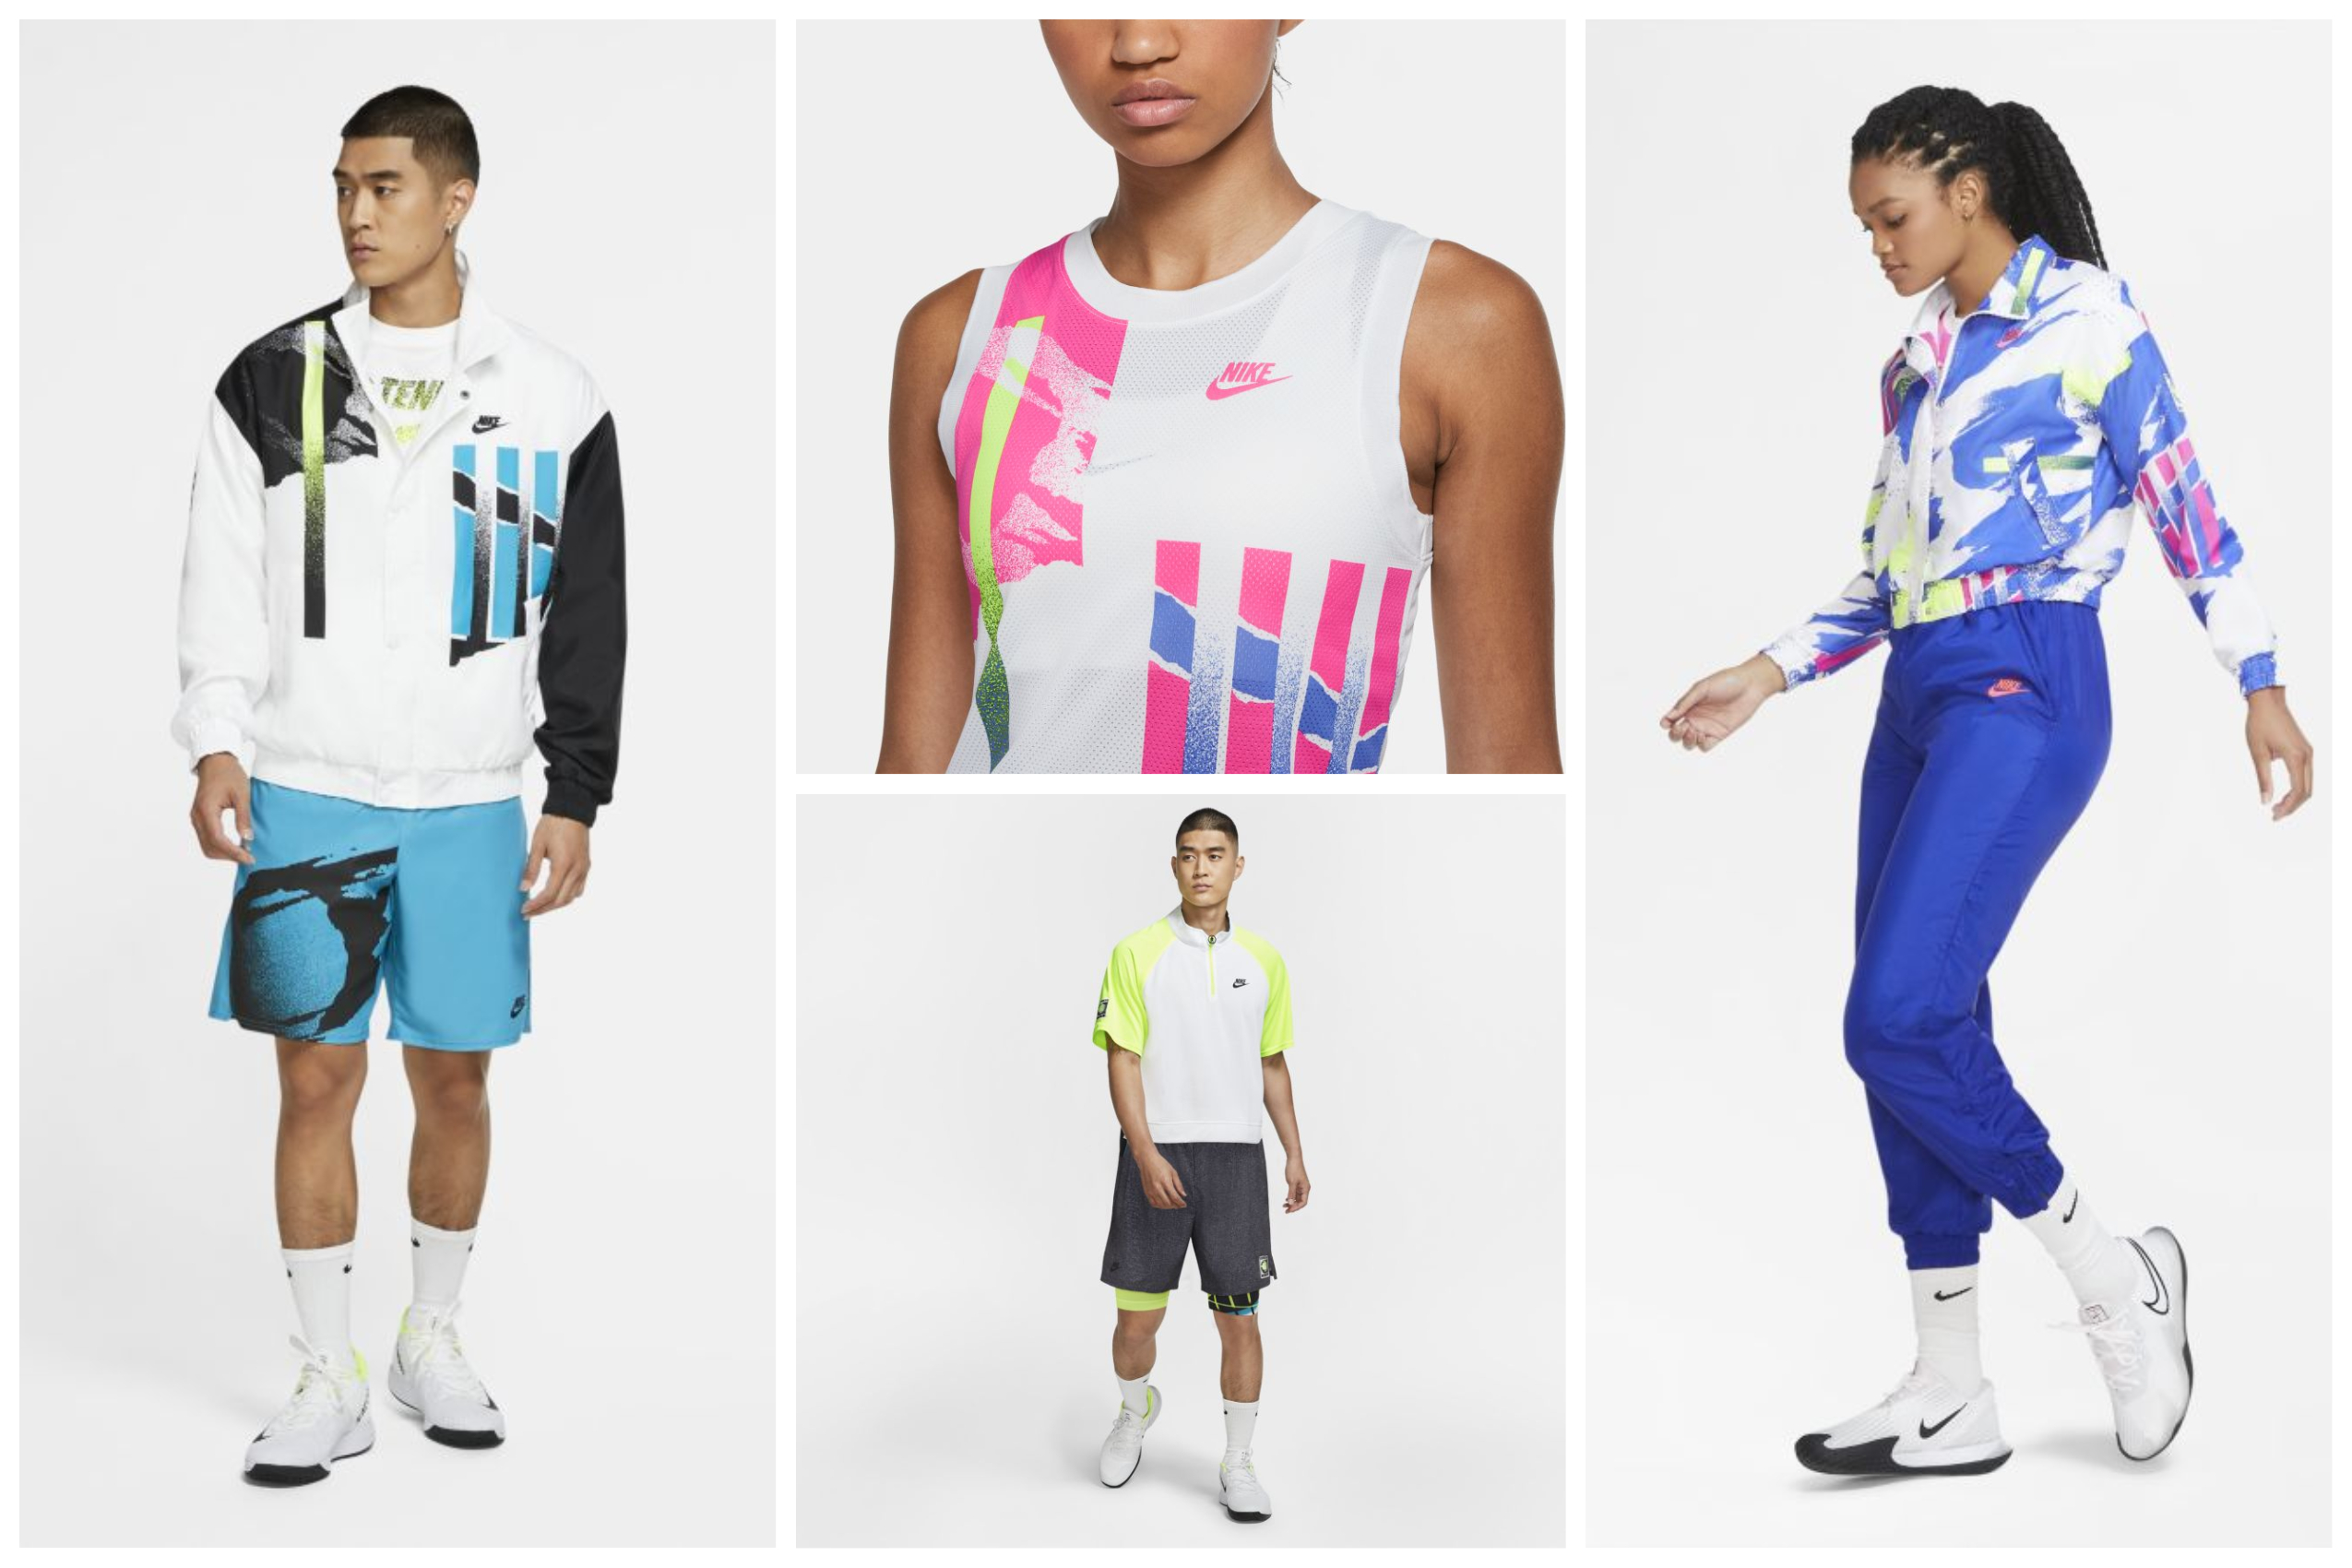 Retro Vibes and Bright Colors- The Nike New York Slam Apparel Here! - TENNIS EXPRESS BLOG